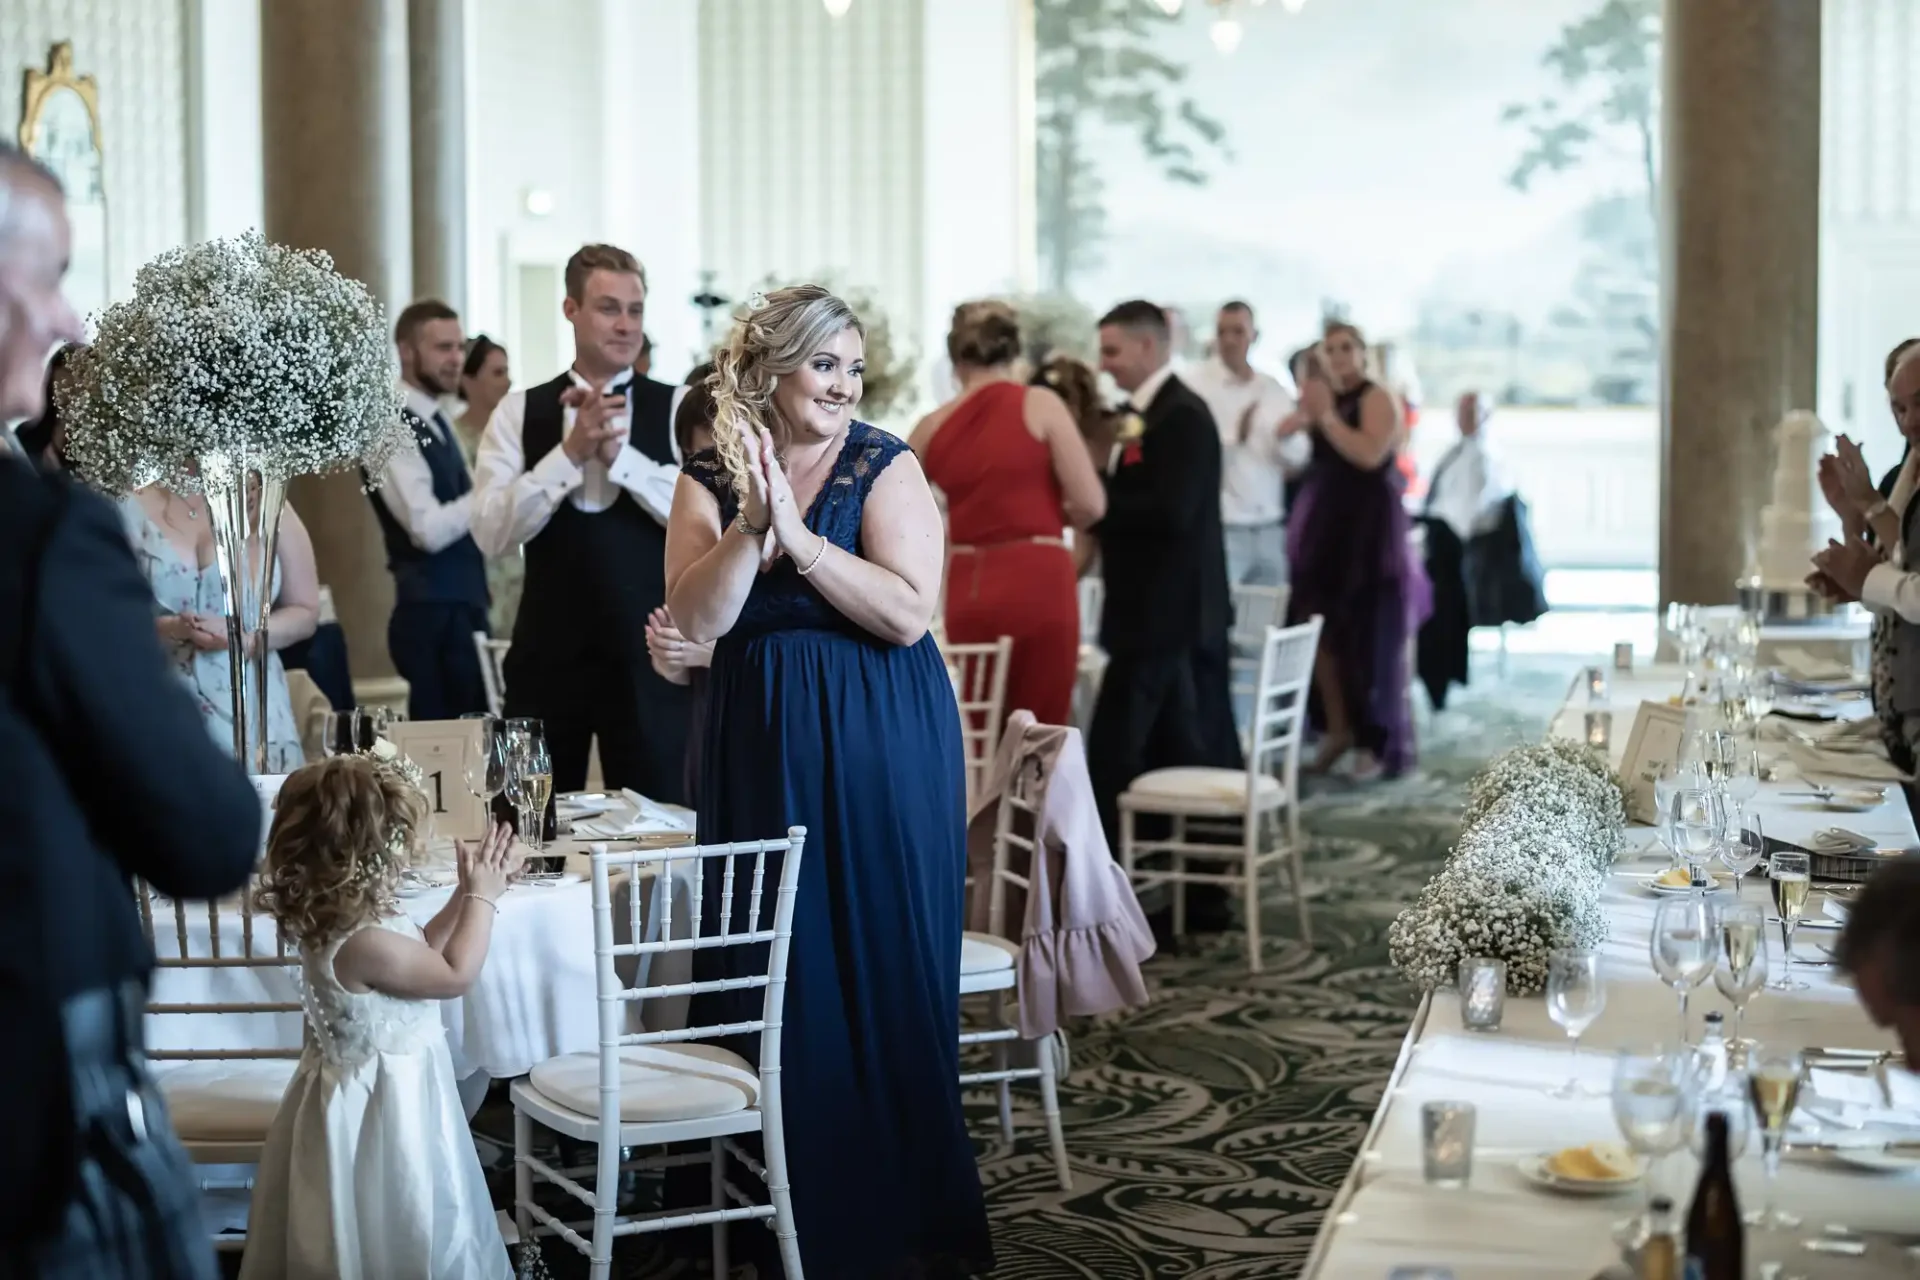 A joyous bride entering a reception hall, clapping guests and elegant tables lined with floral arrangements.